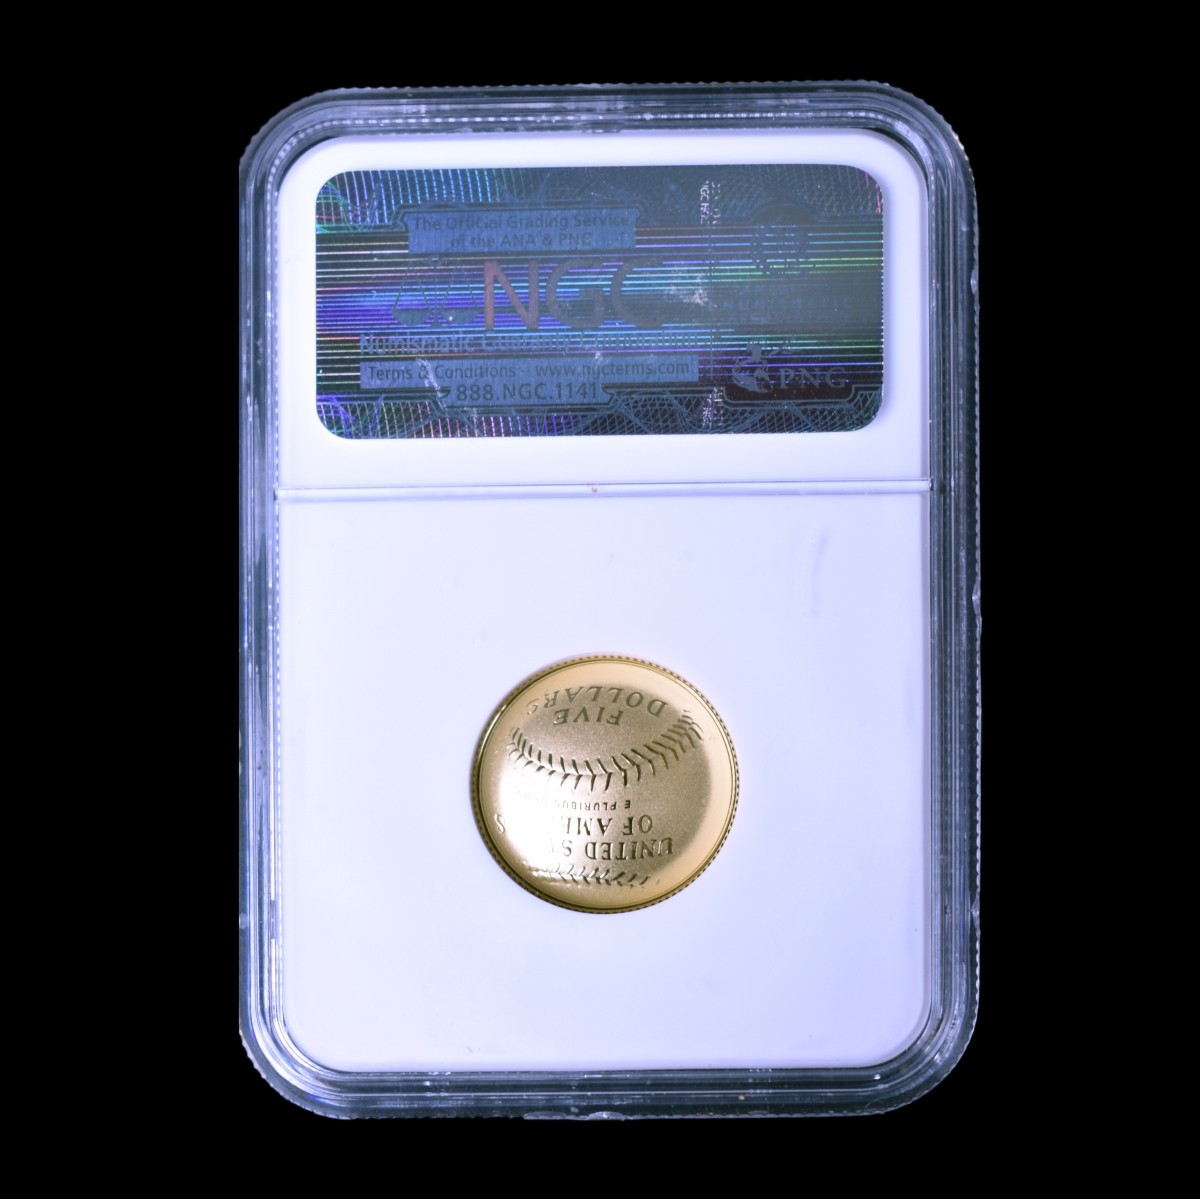 2014-W $5 Baseball Hall of Fame Gold Coin